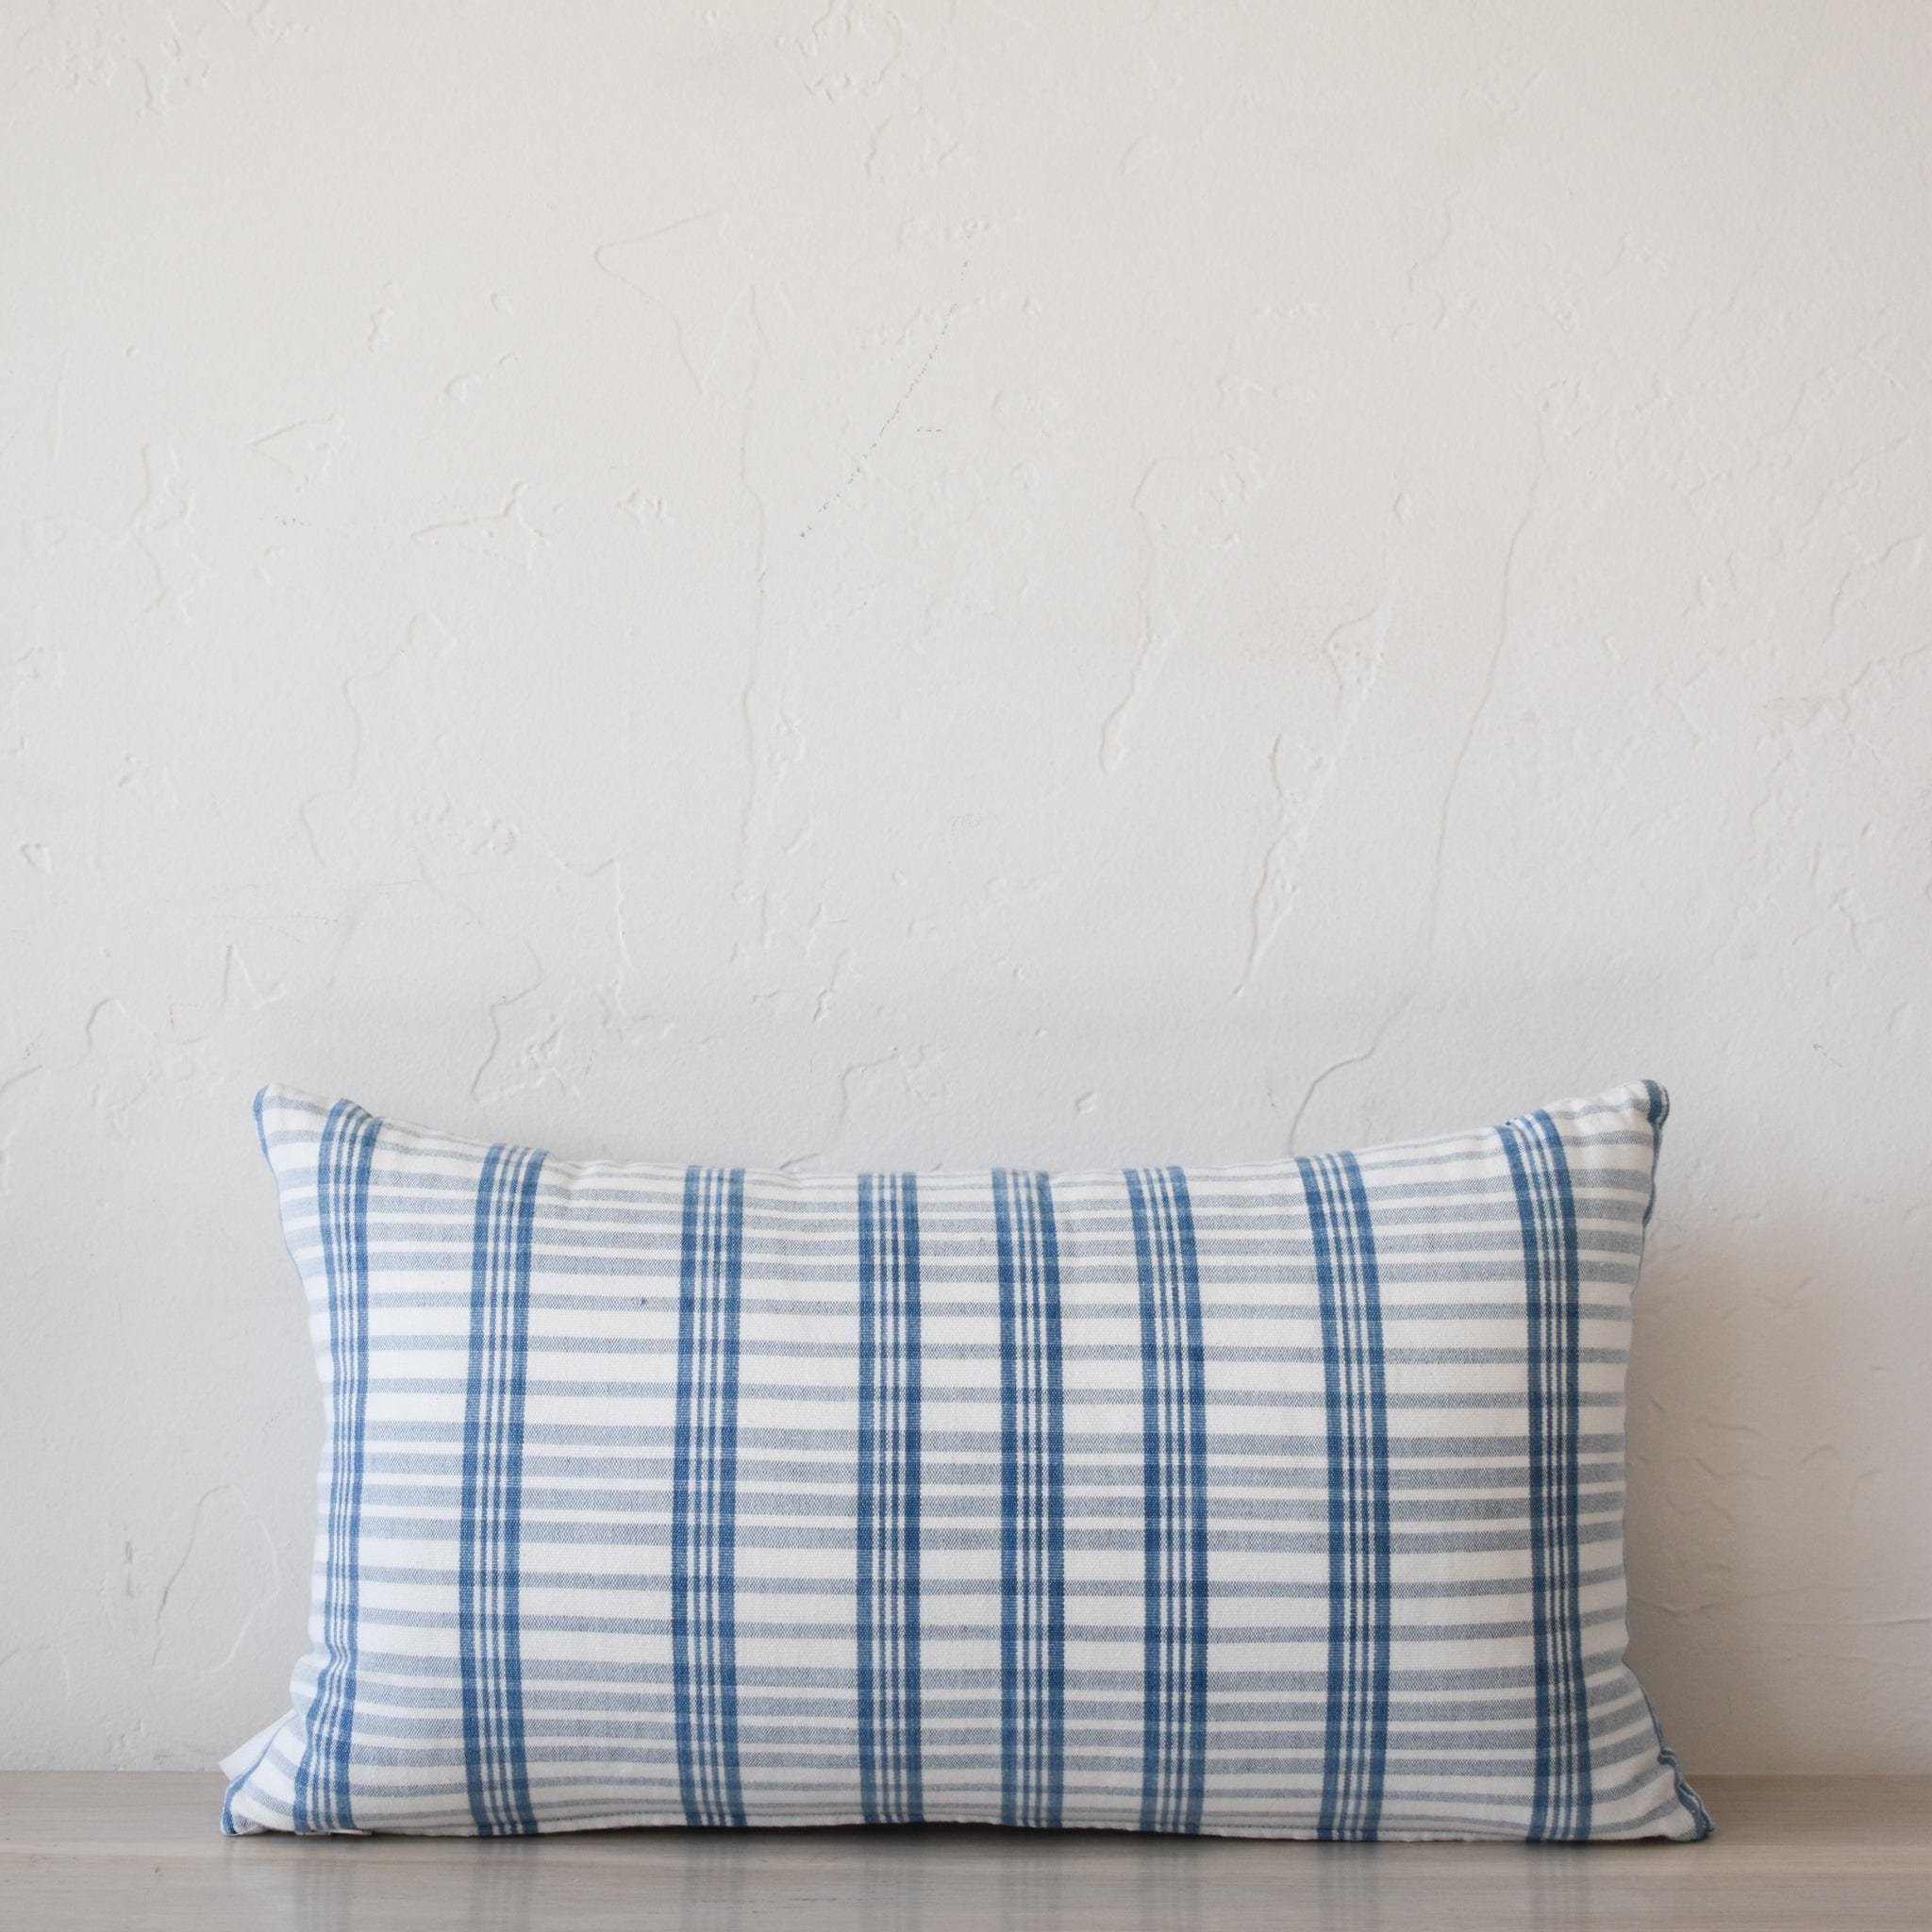 Archive New York Decor Coco Plaid Pillow in Natural with Indigo